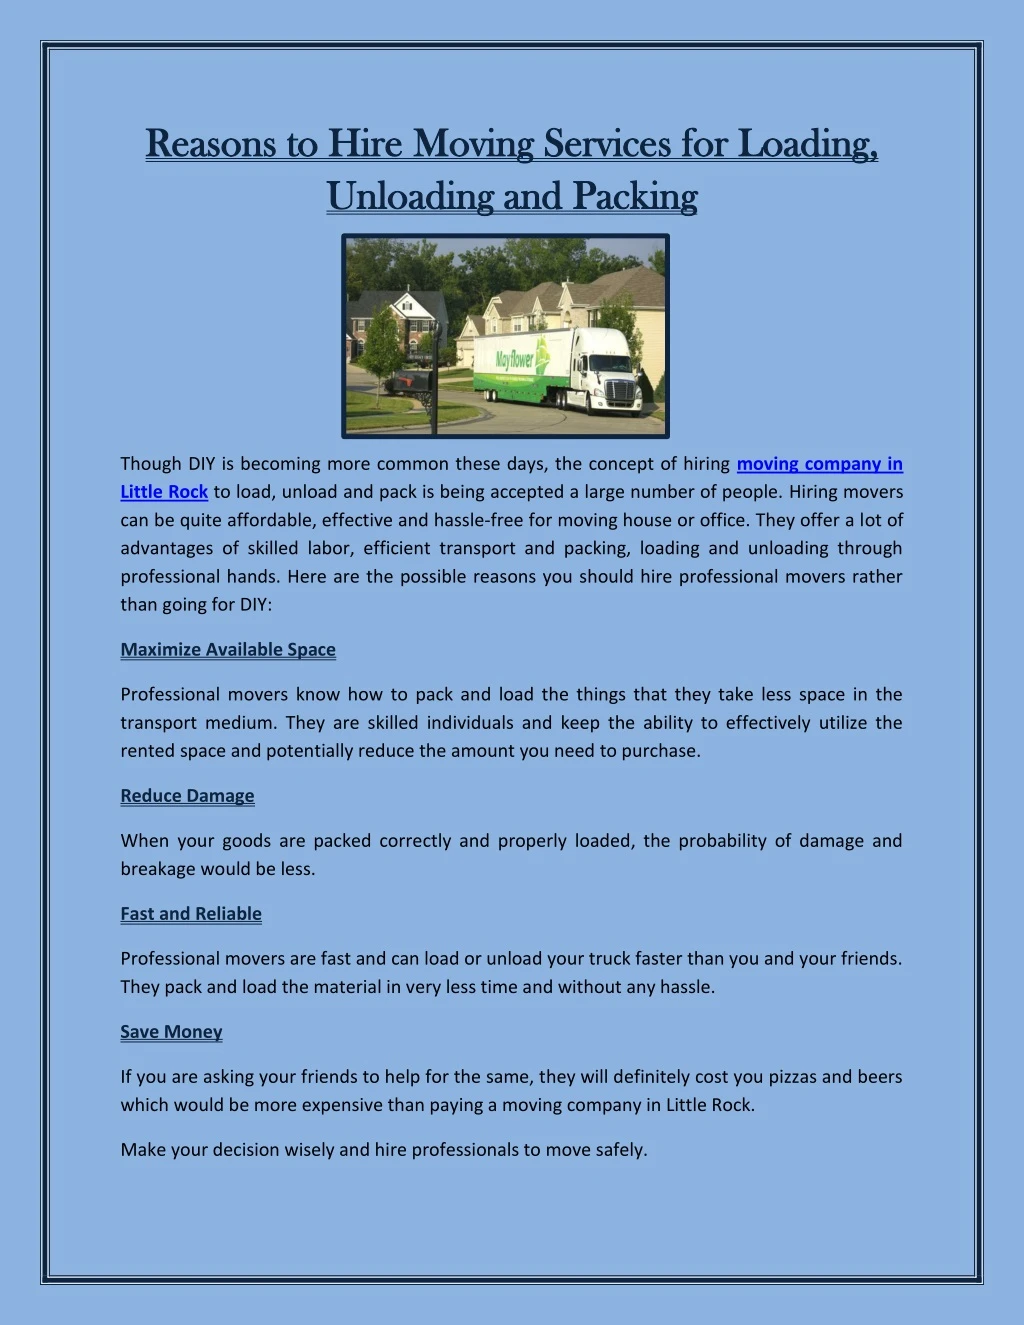 reasons reasons t to o hire moving services hire